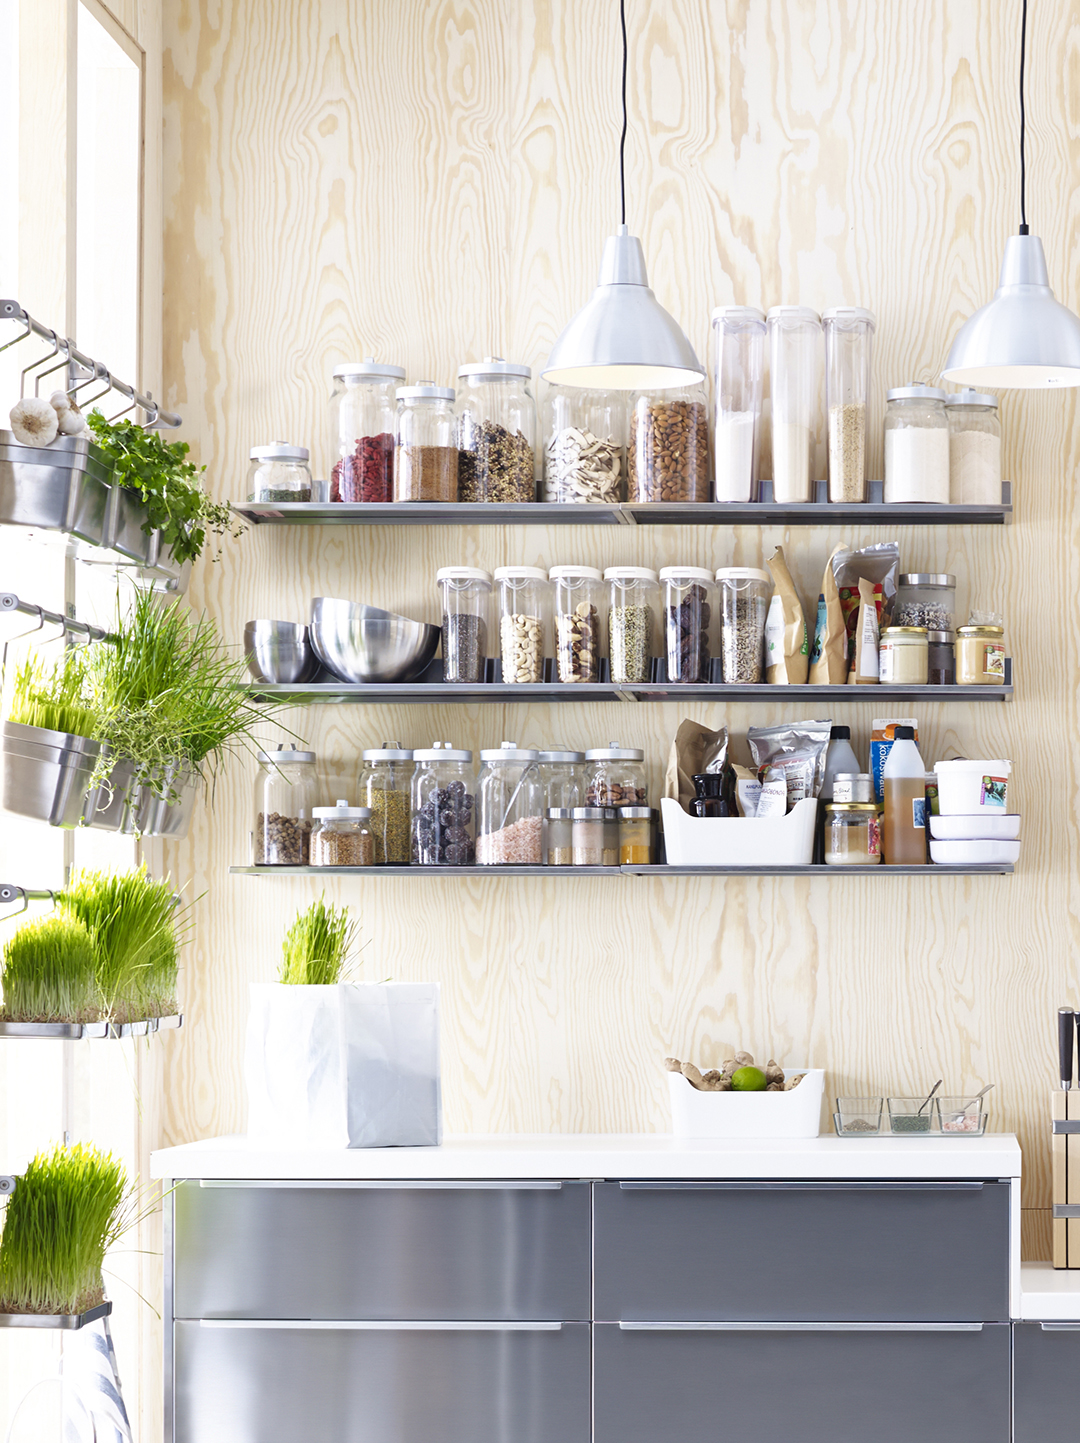 How to make the most of limited space in a small kitchen ...